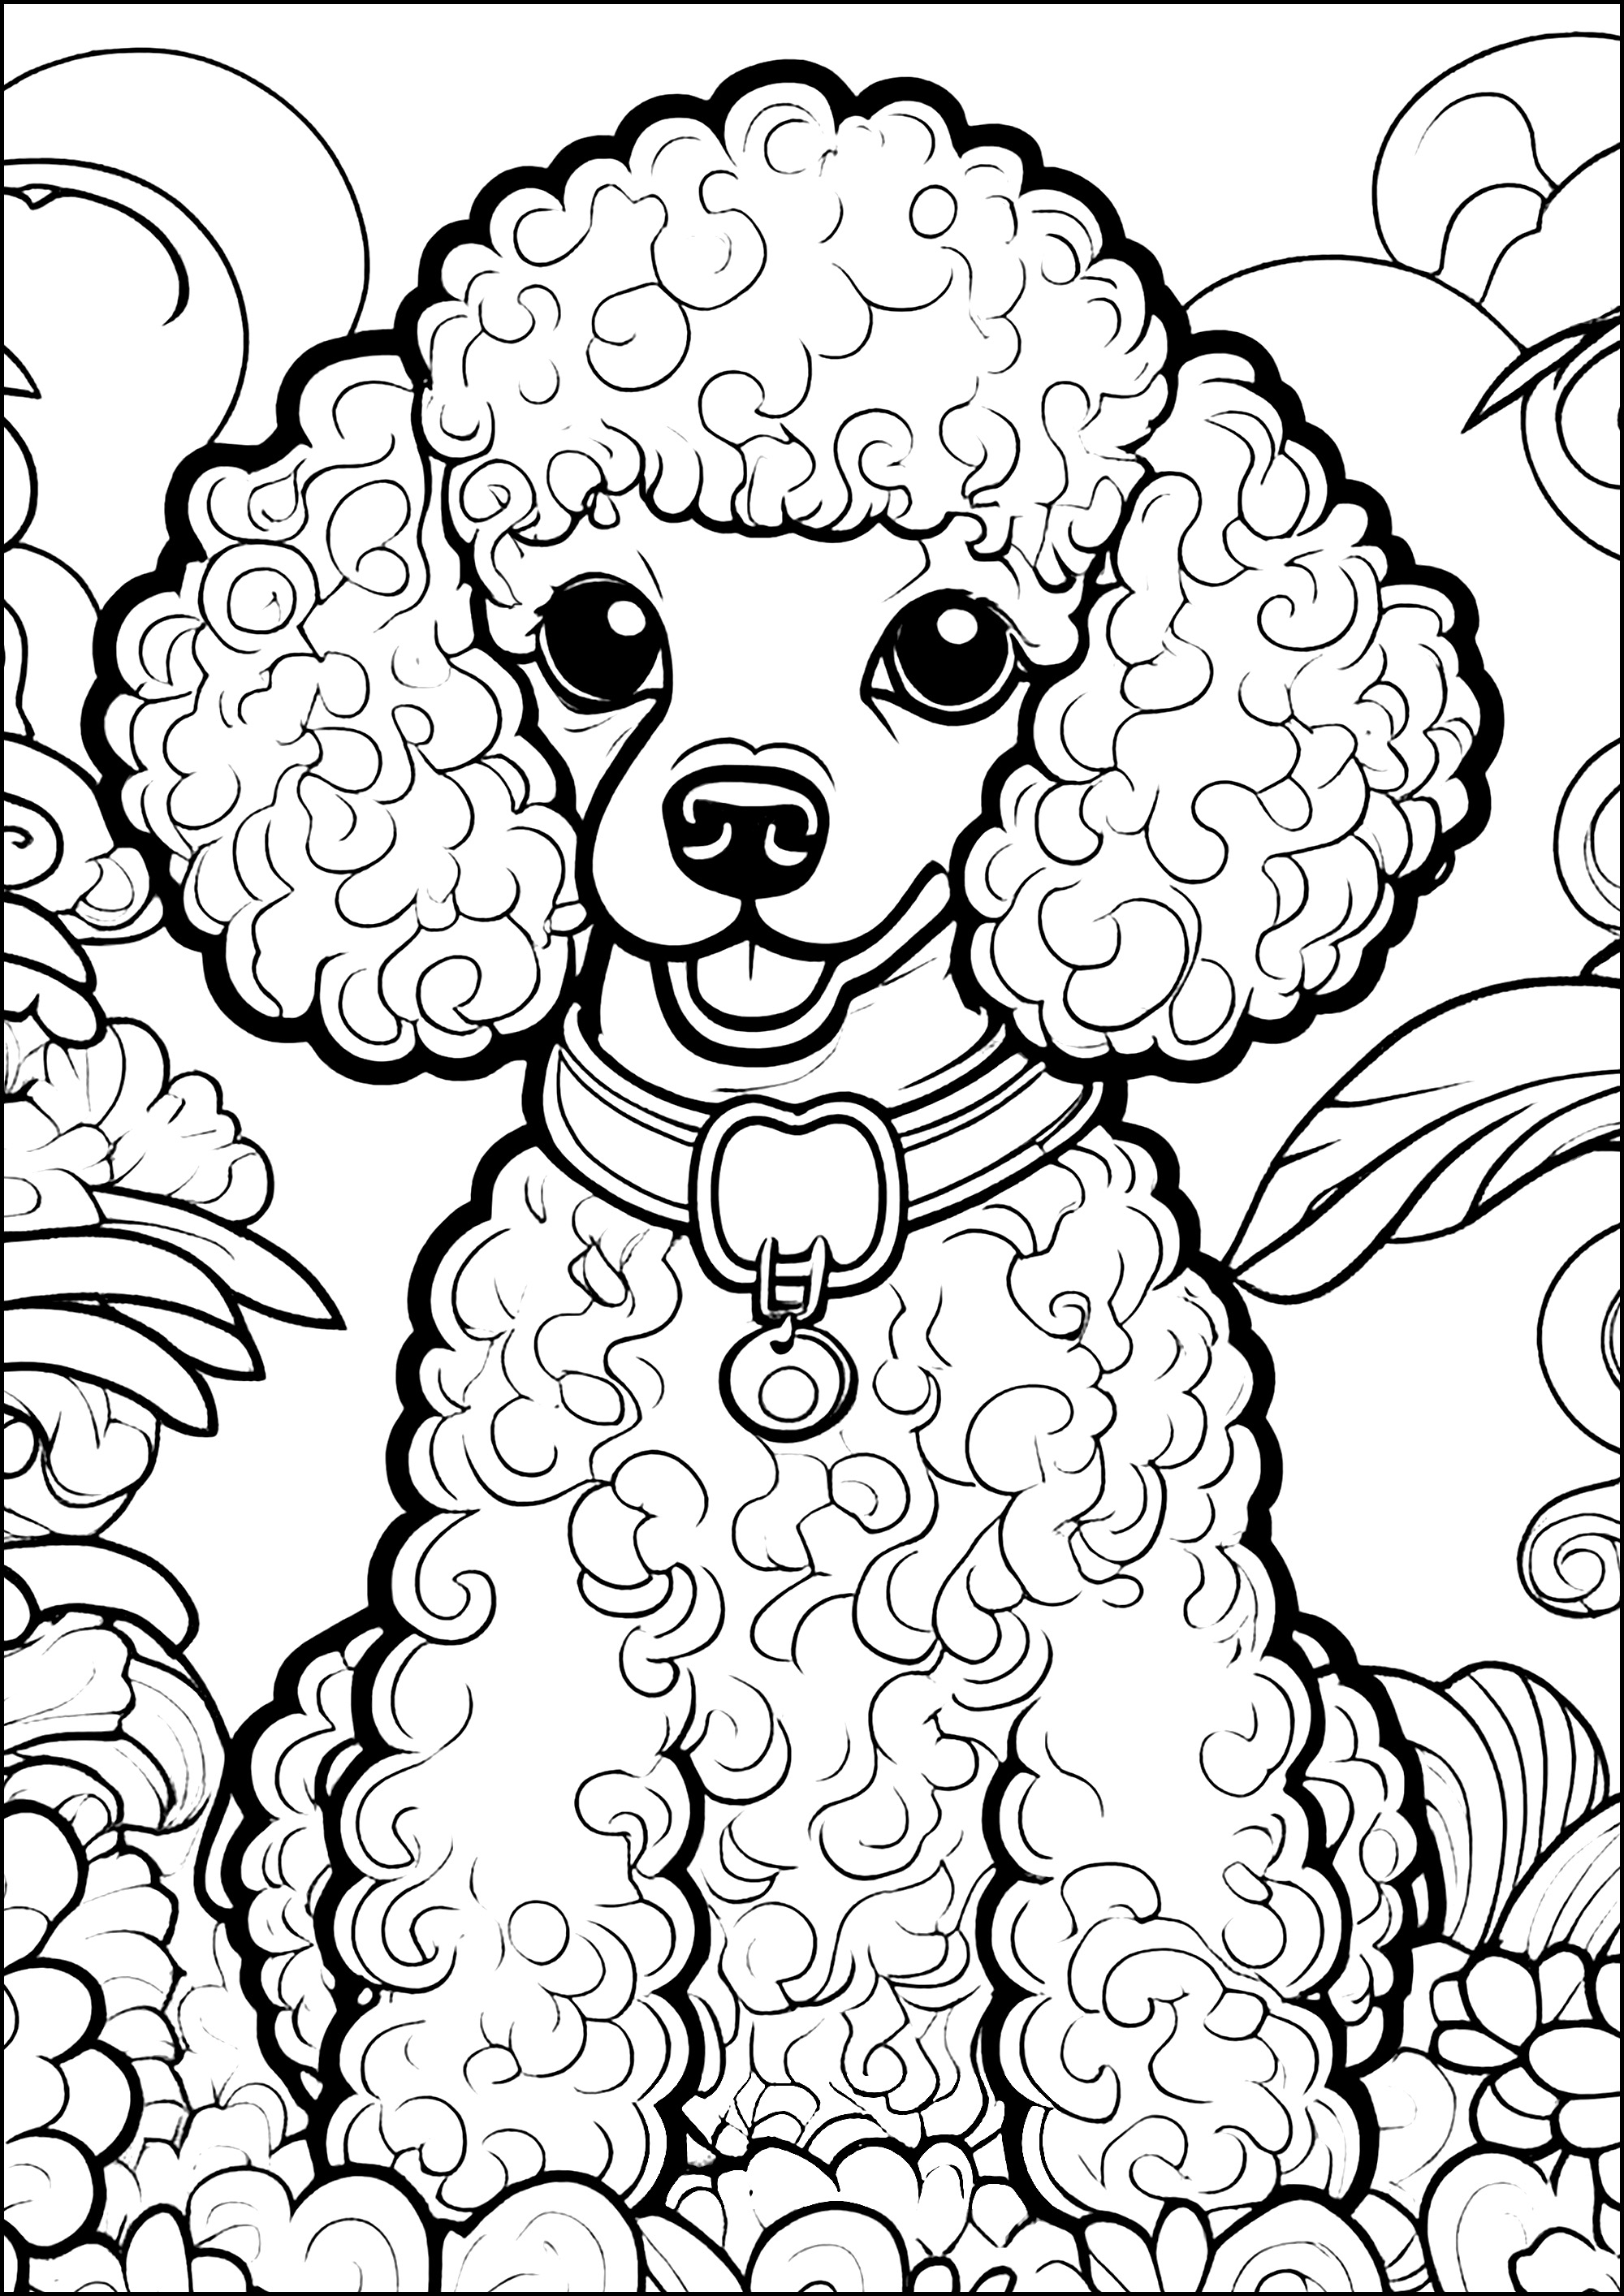 Young poodle with cute curls